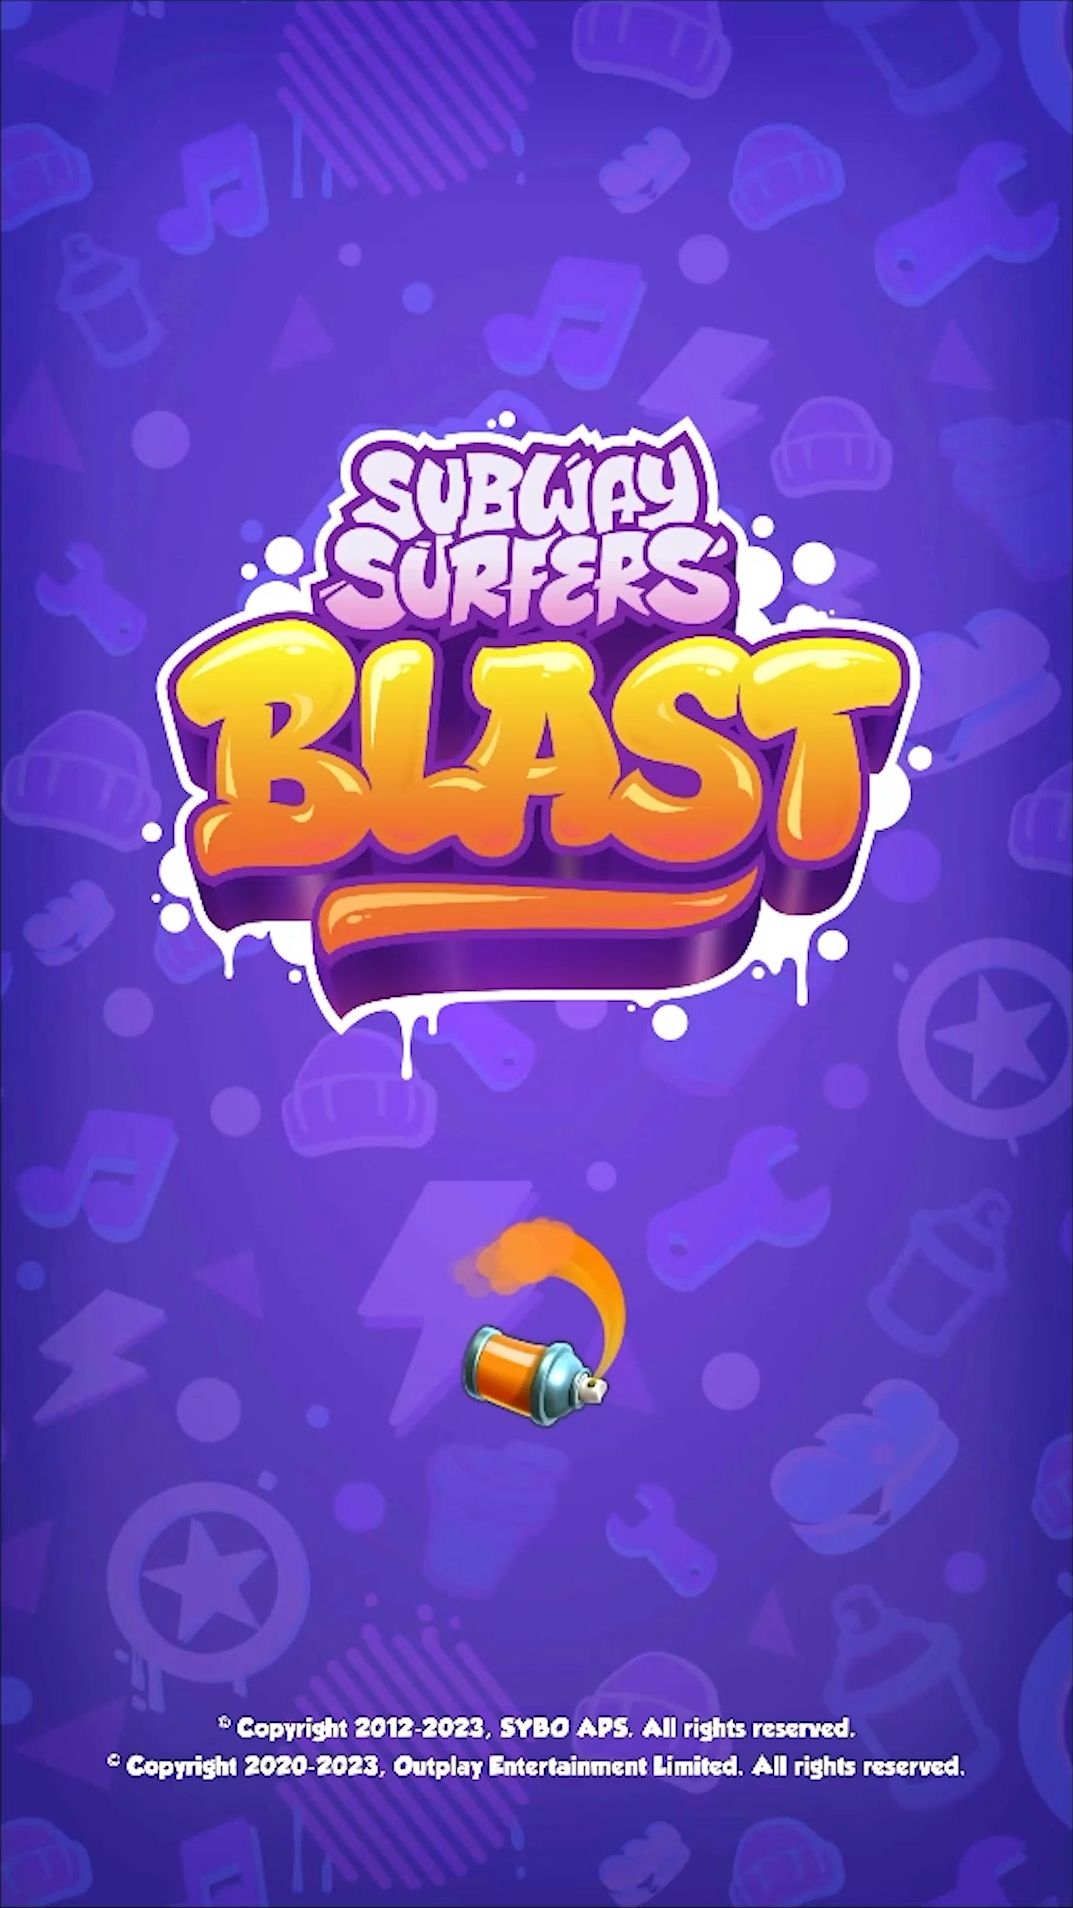 Subway Surfers Blast APK (Android Game) - Free Download